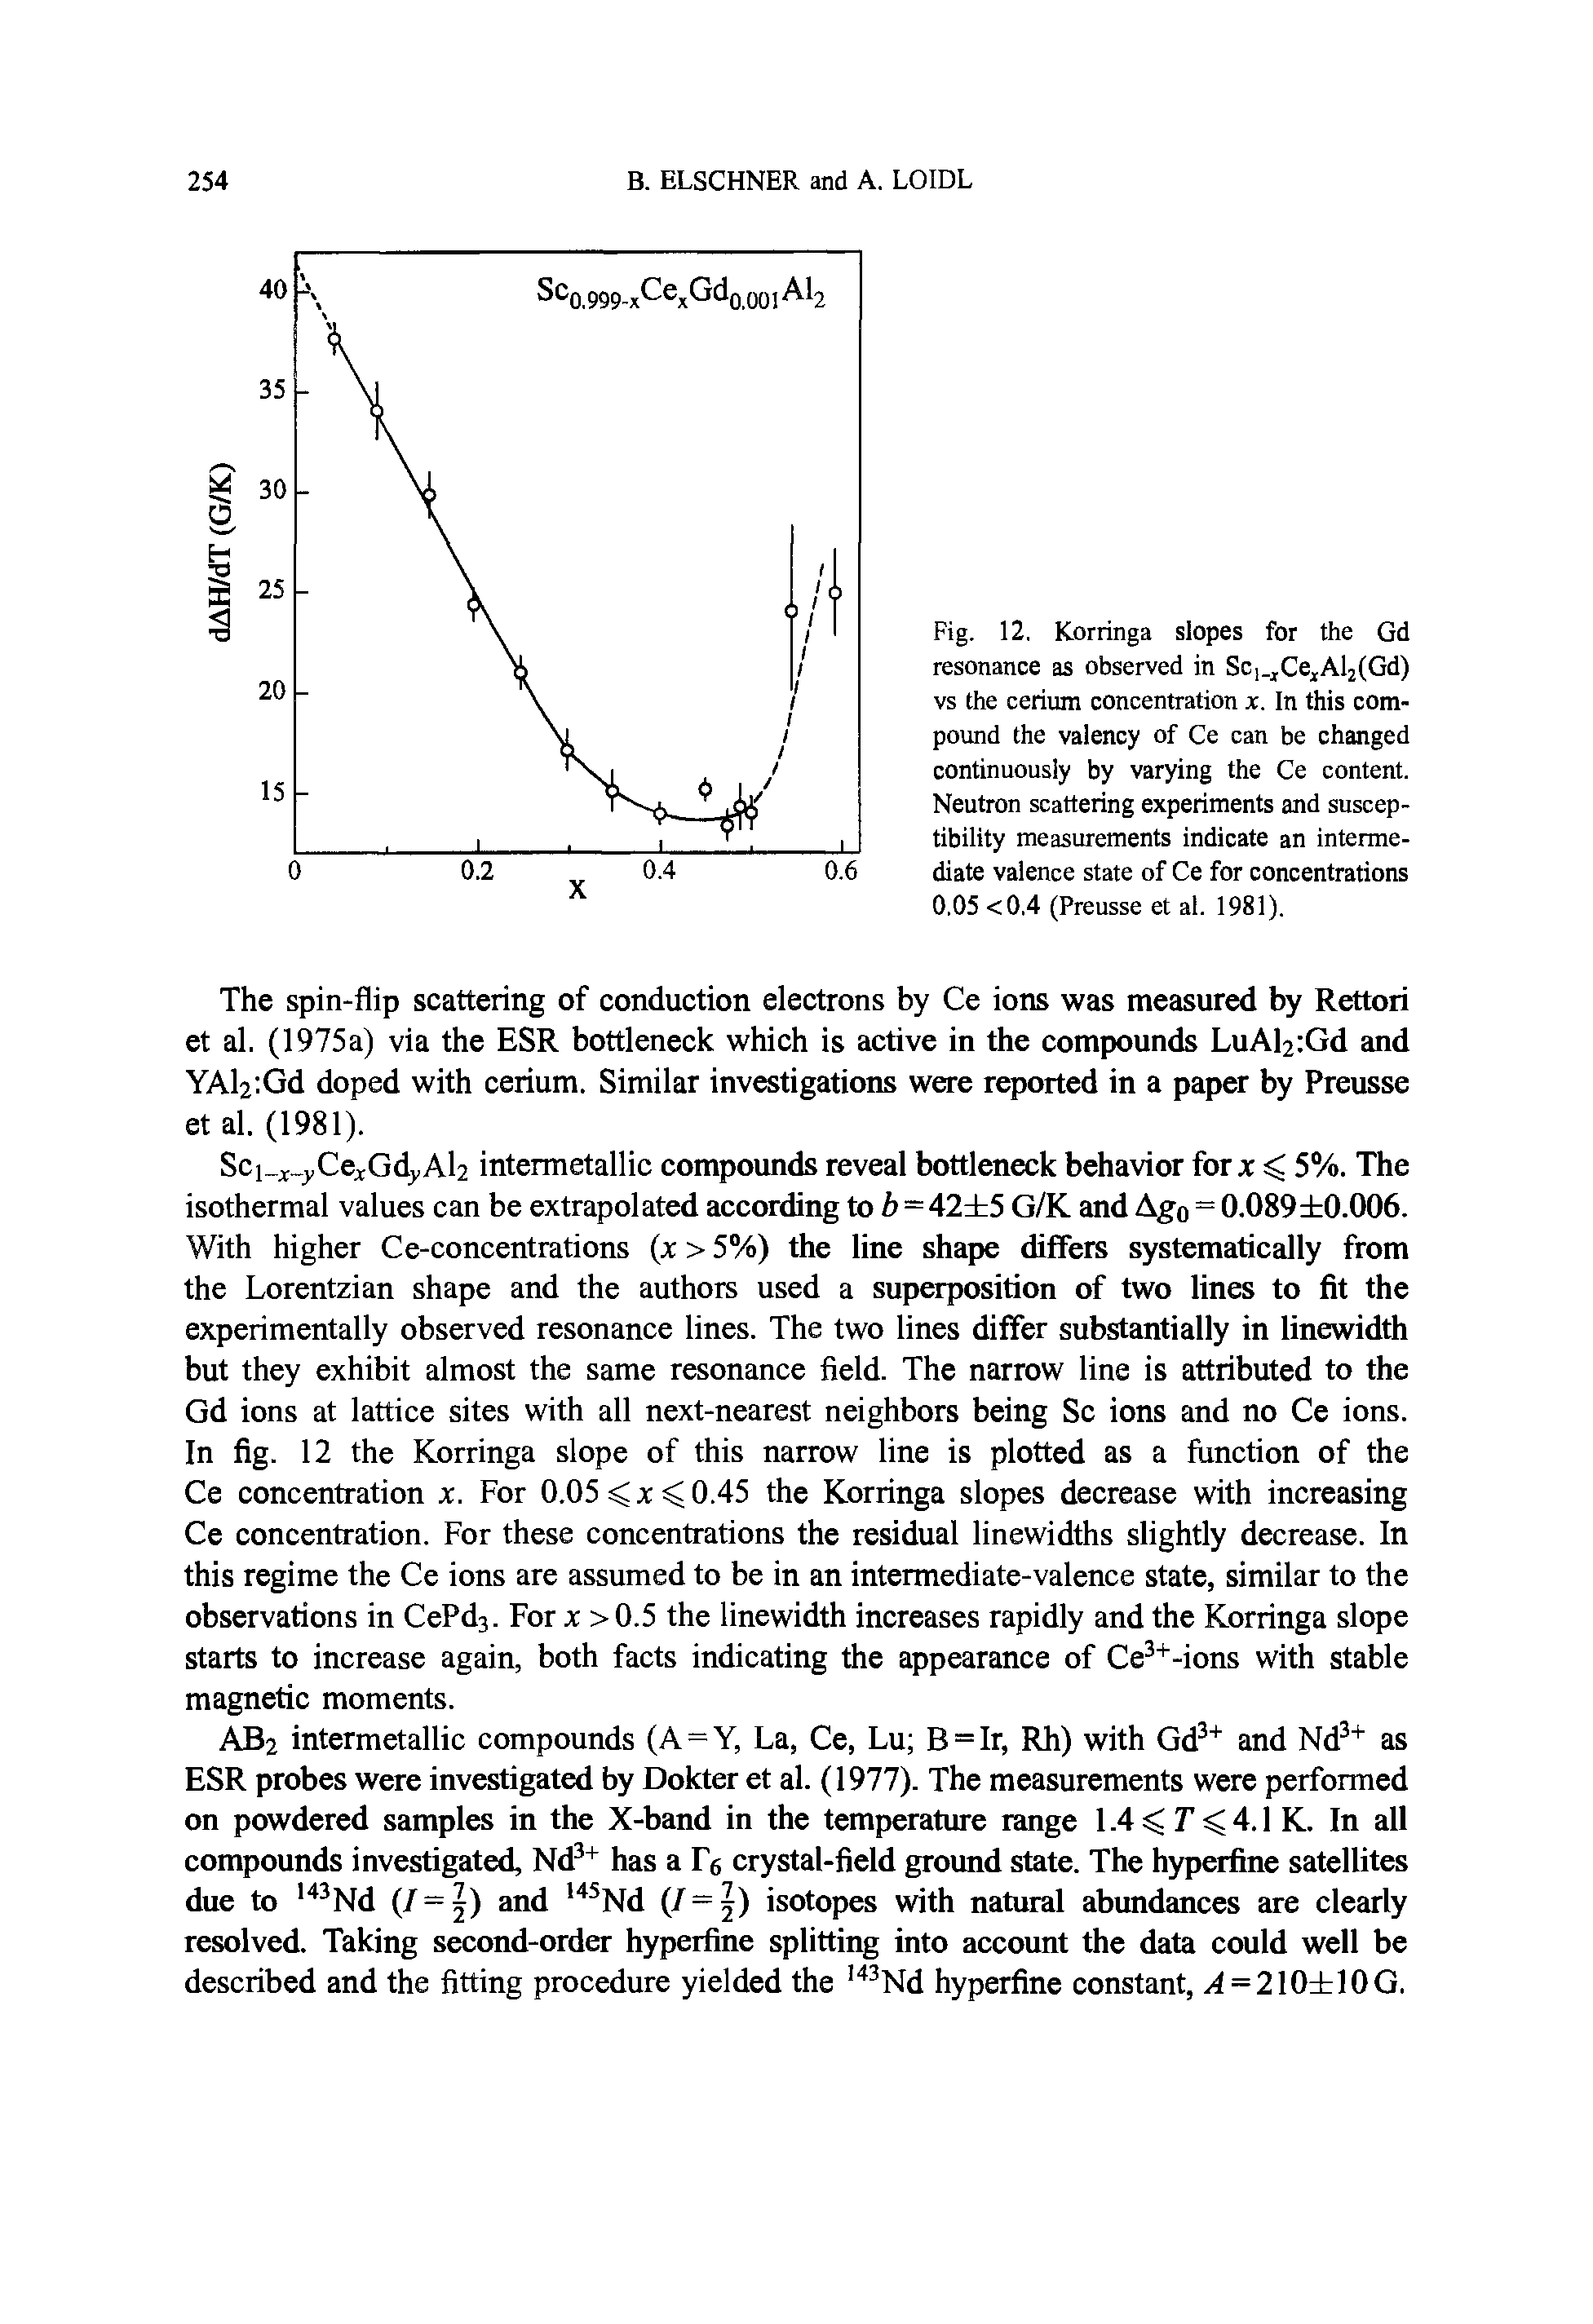 Fig. 12. Korringa slopes for the Gd resonance as observed in Sci. Ce AljCGd) vs the cerium concentration jc. In this compound the valency of Ce can be changed continuously by varying the Ce content. Neutron scattering experiments and susceptibility measurements indicate an intermediate valence state of Ce for concentrations 0.05 <0.4 (Preusse et al. 1981).